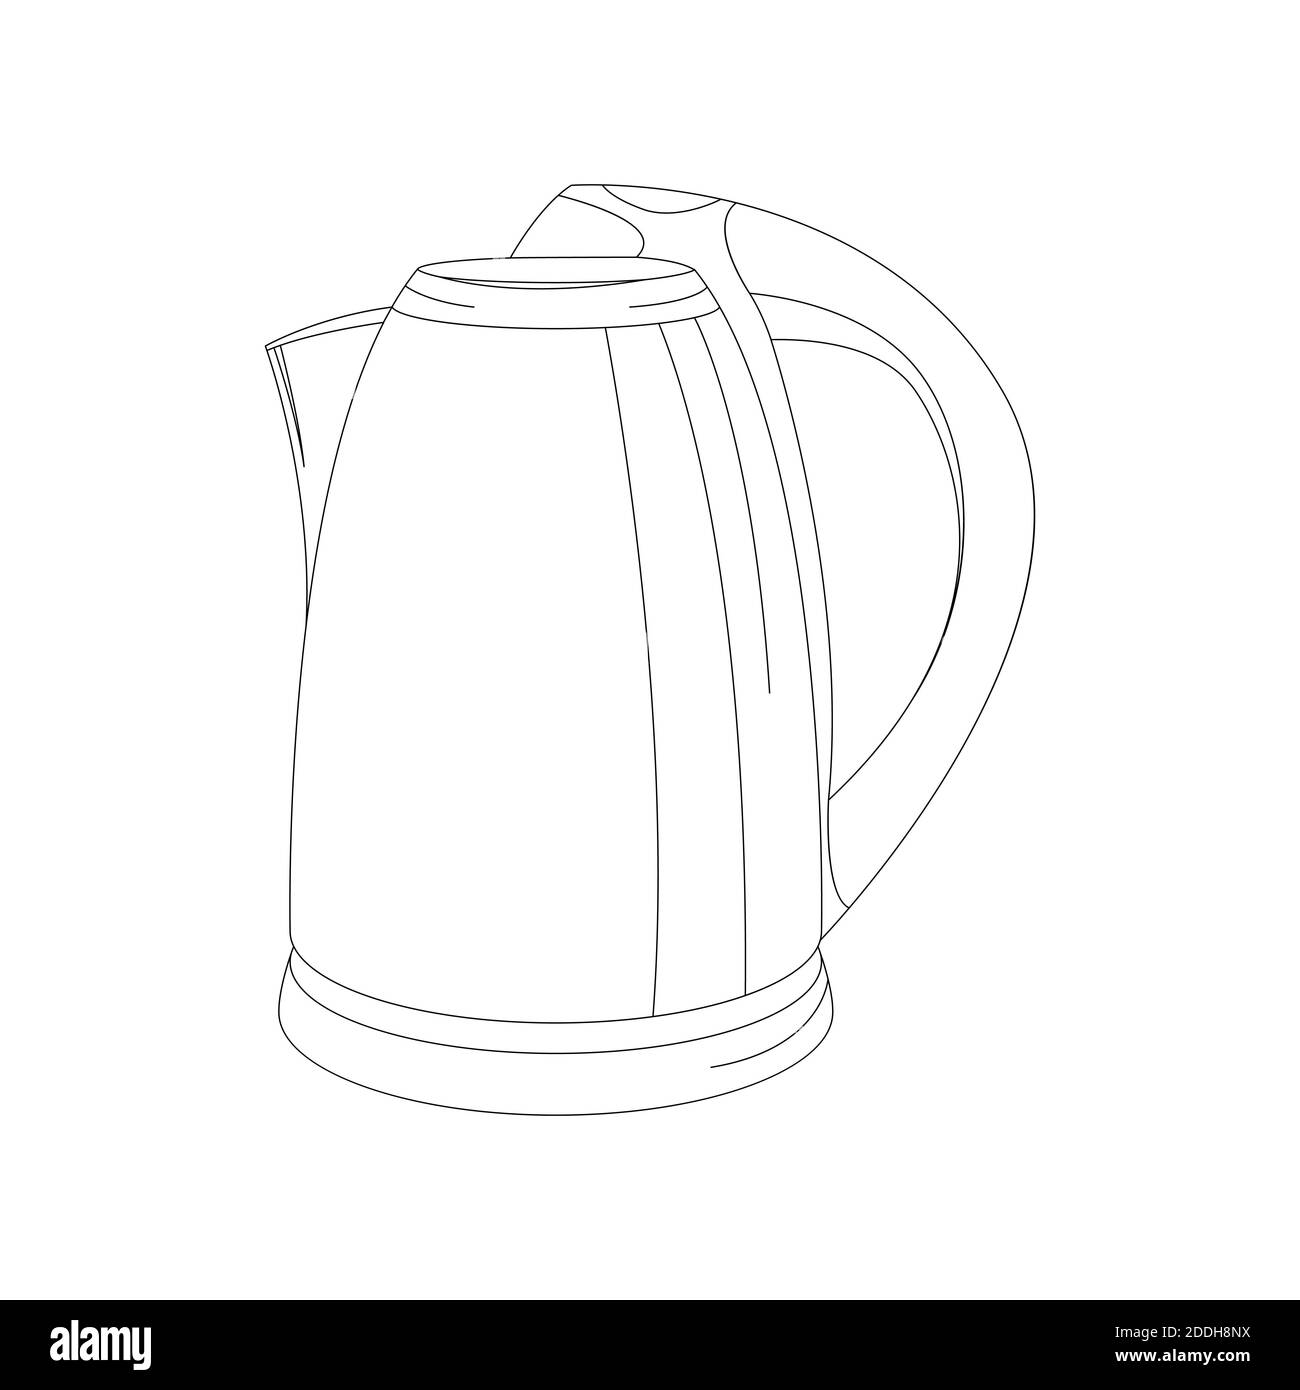 36,269 Kettle Draw Images, Stock Photos & Vectors | Shutterstock